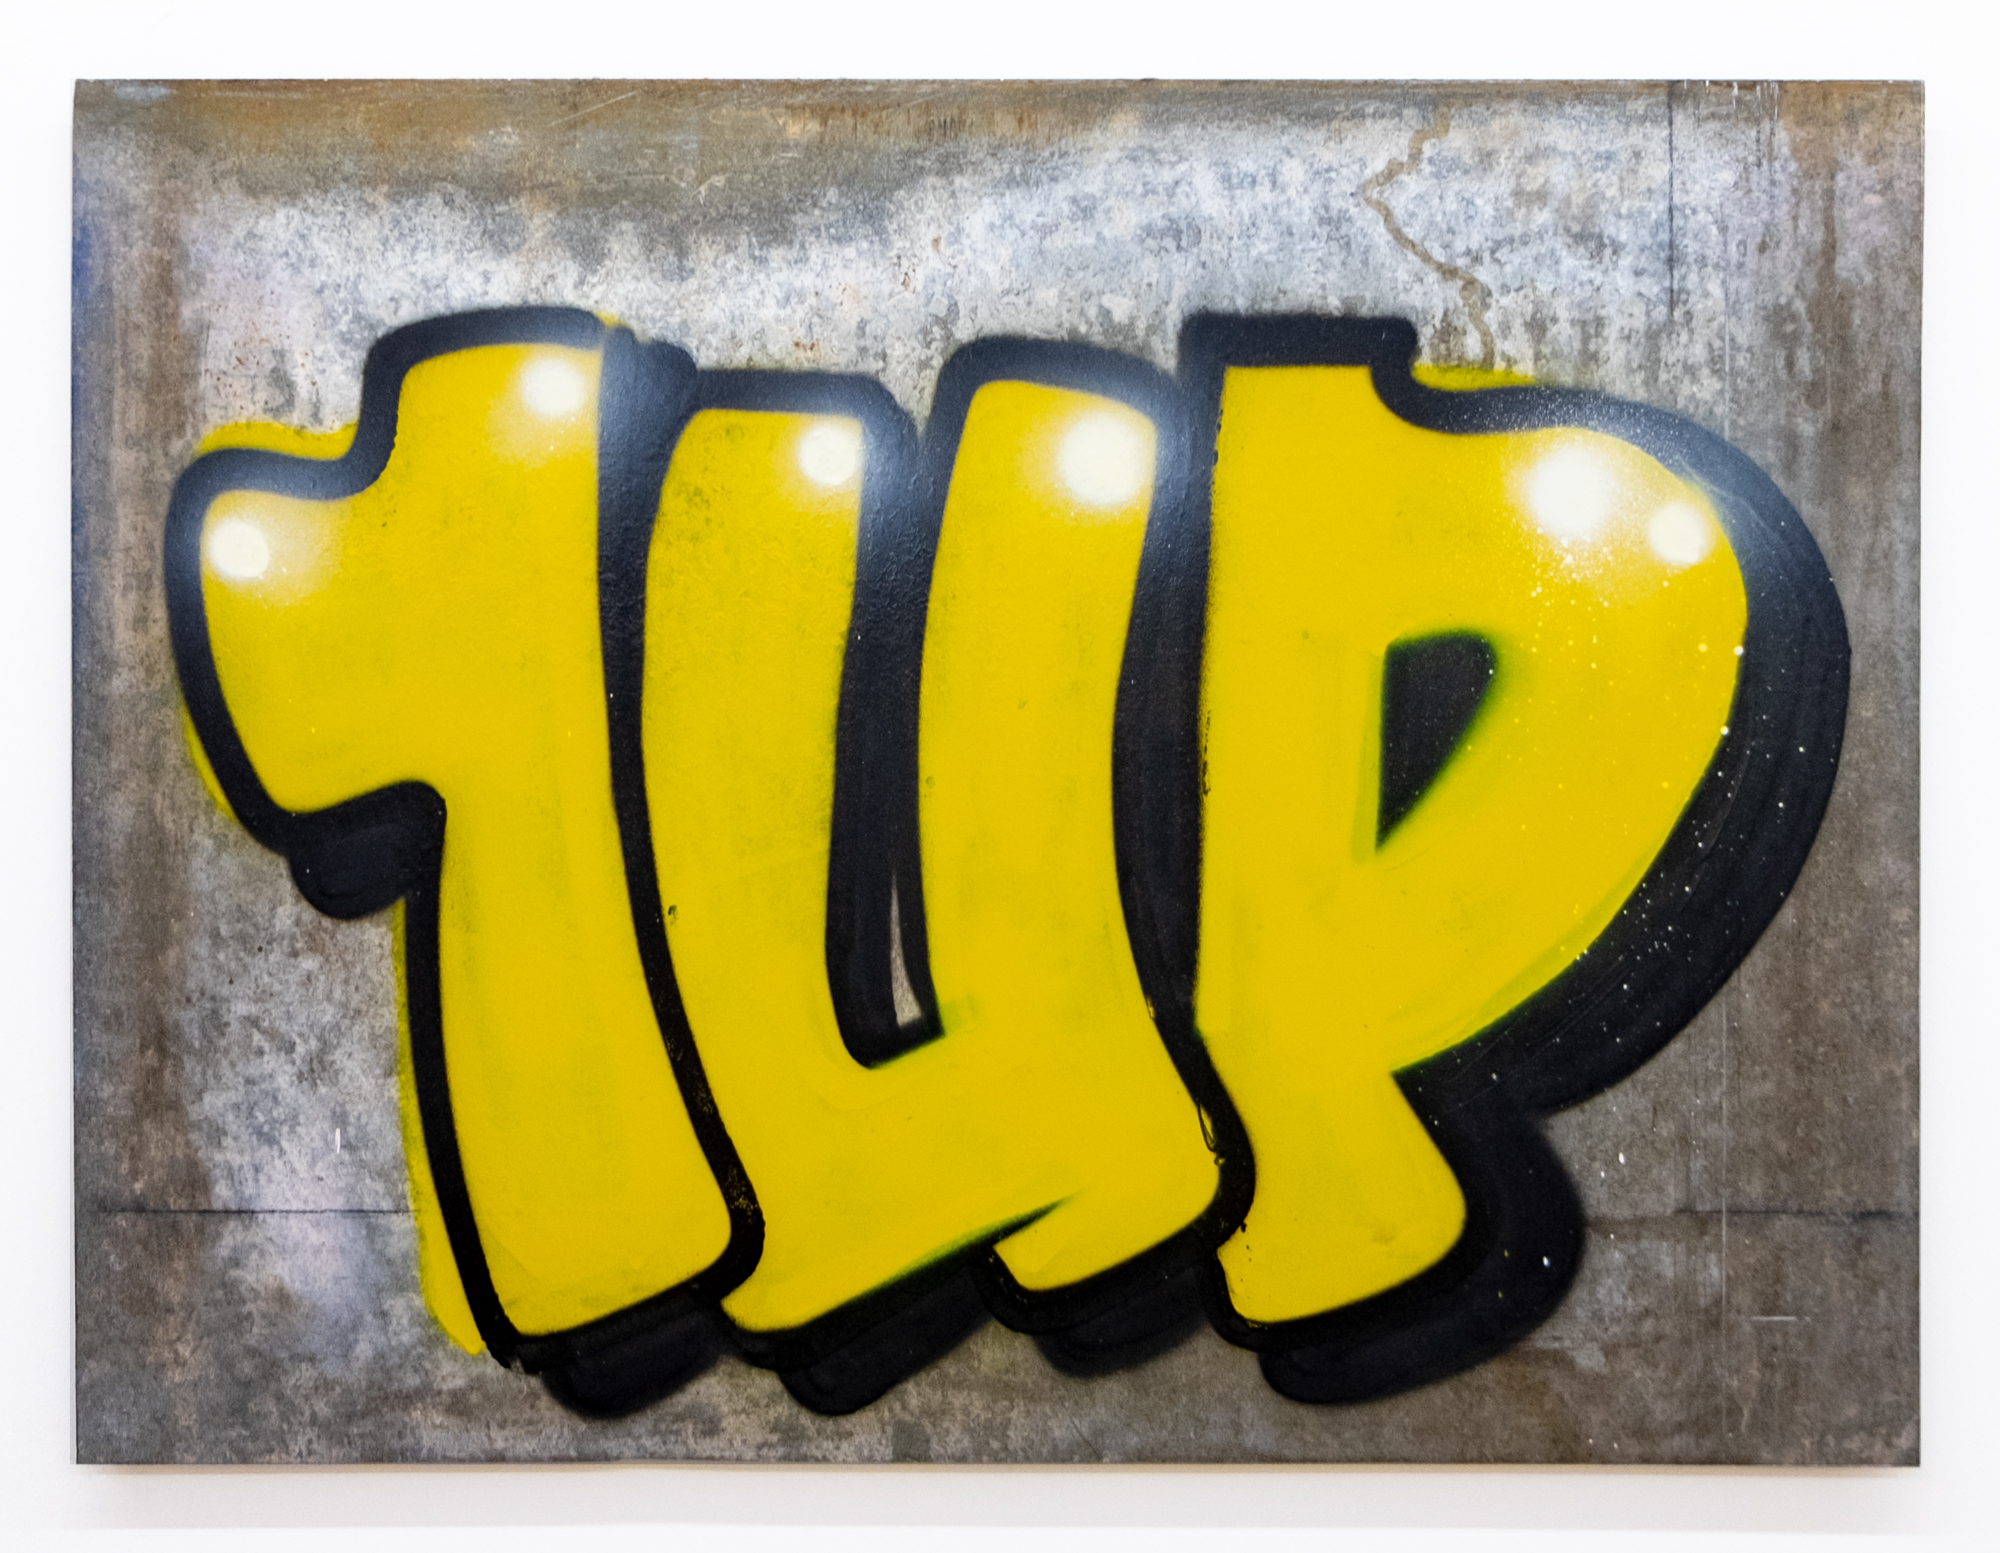 1up-andy-2-affenfaust-galerie.jpg